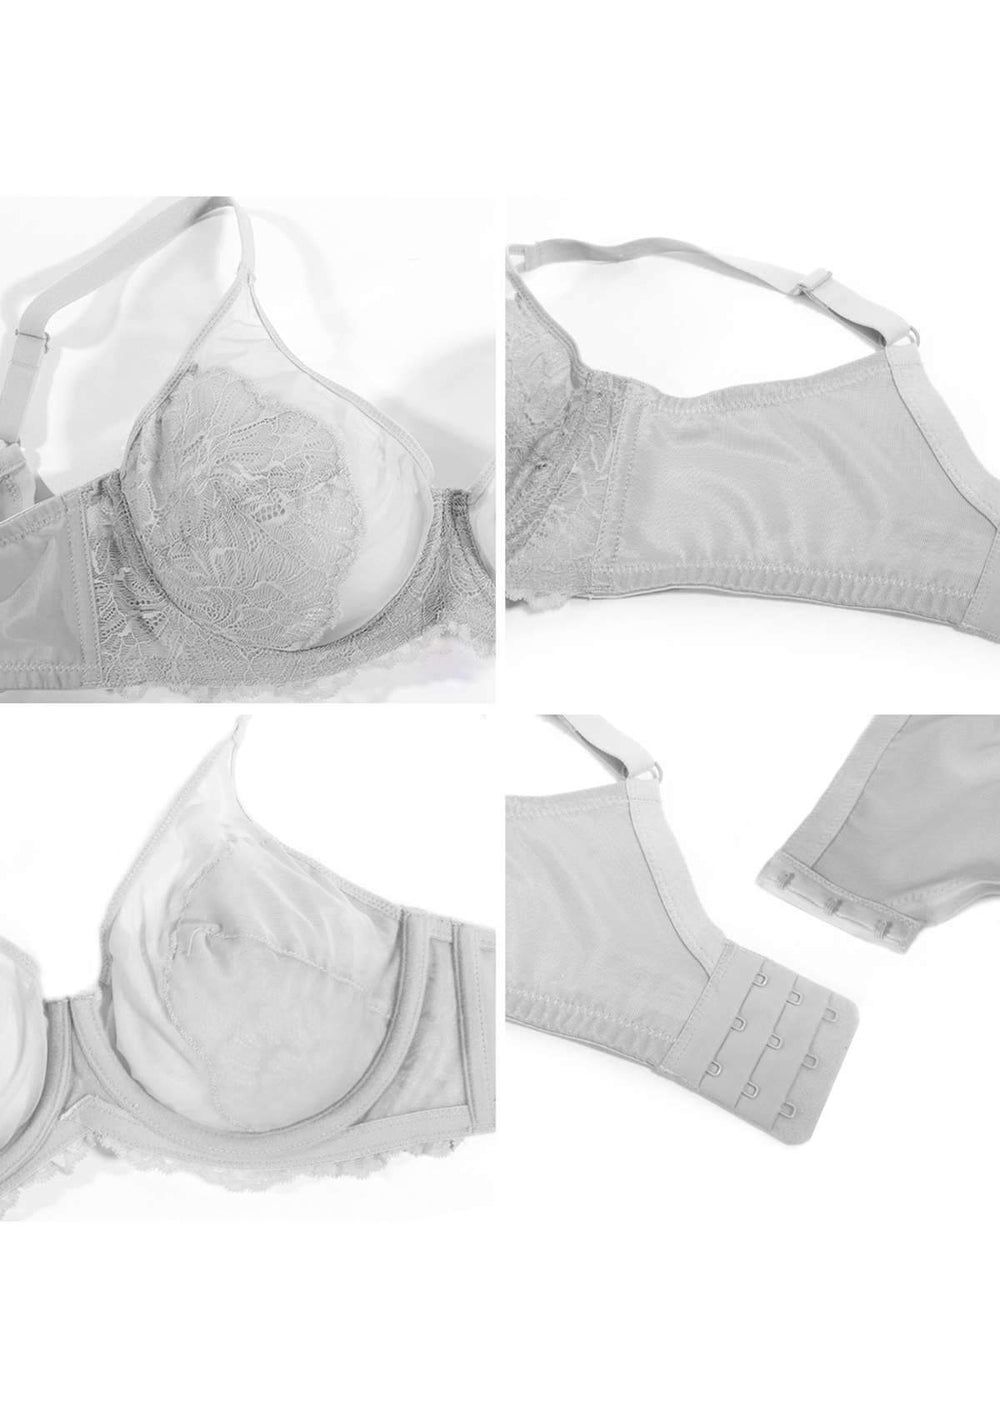 HSIA Blossom Bestseller Unlined Underwire Lace Bra